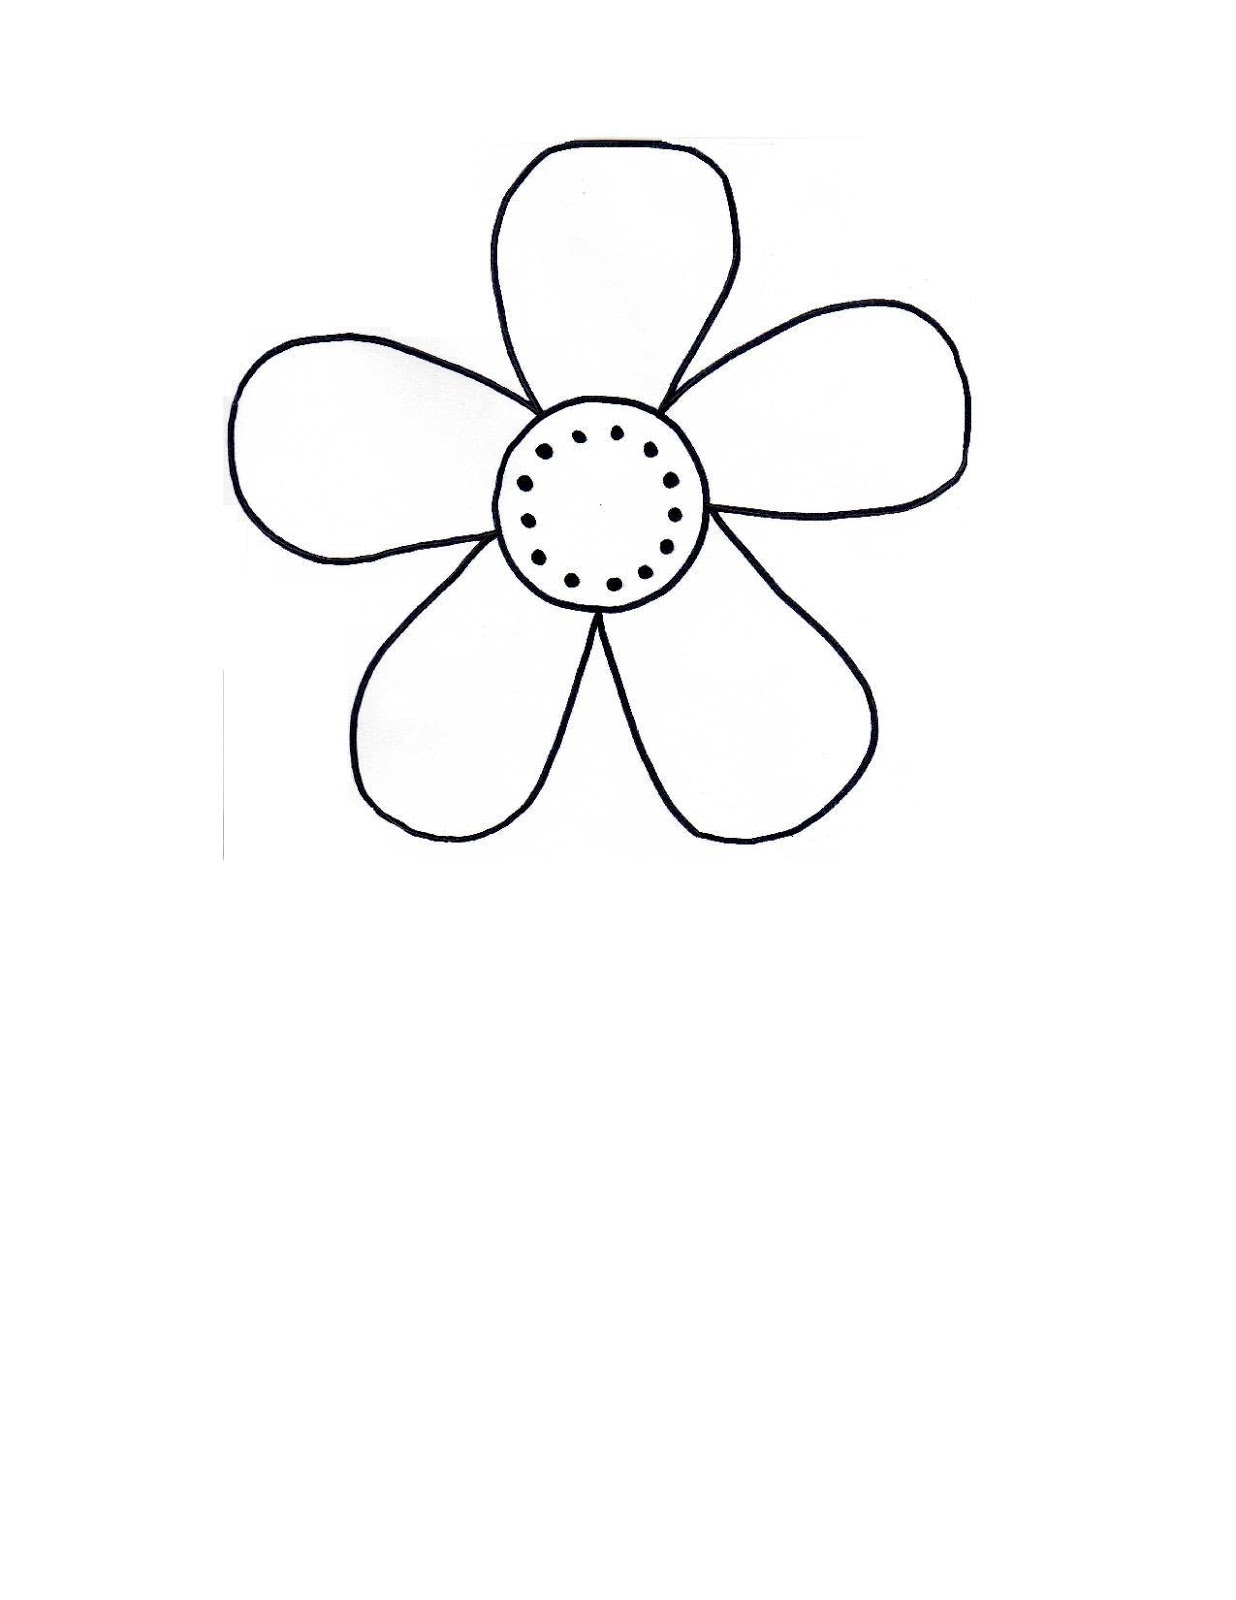 Free Printable Flower Template - ClipArt Best